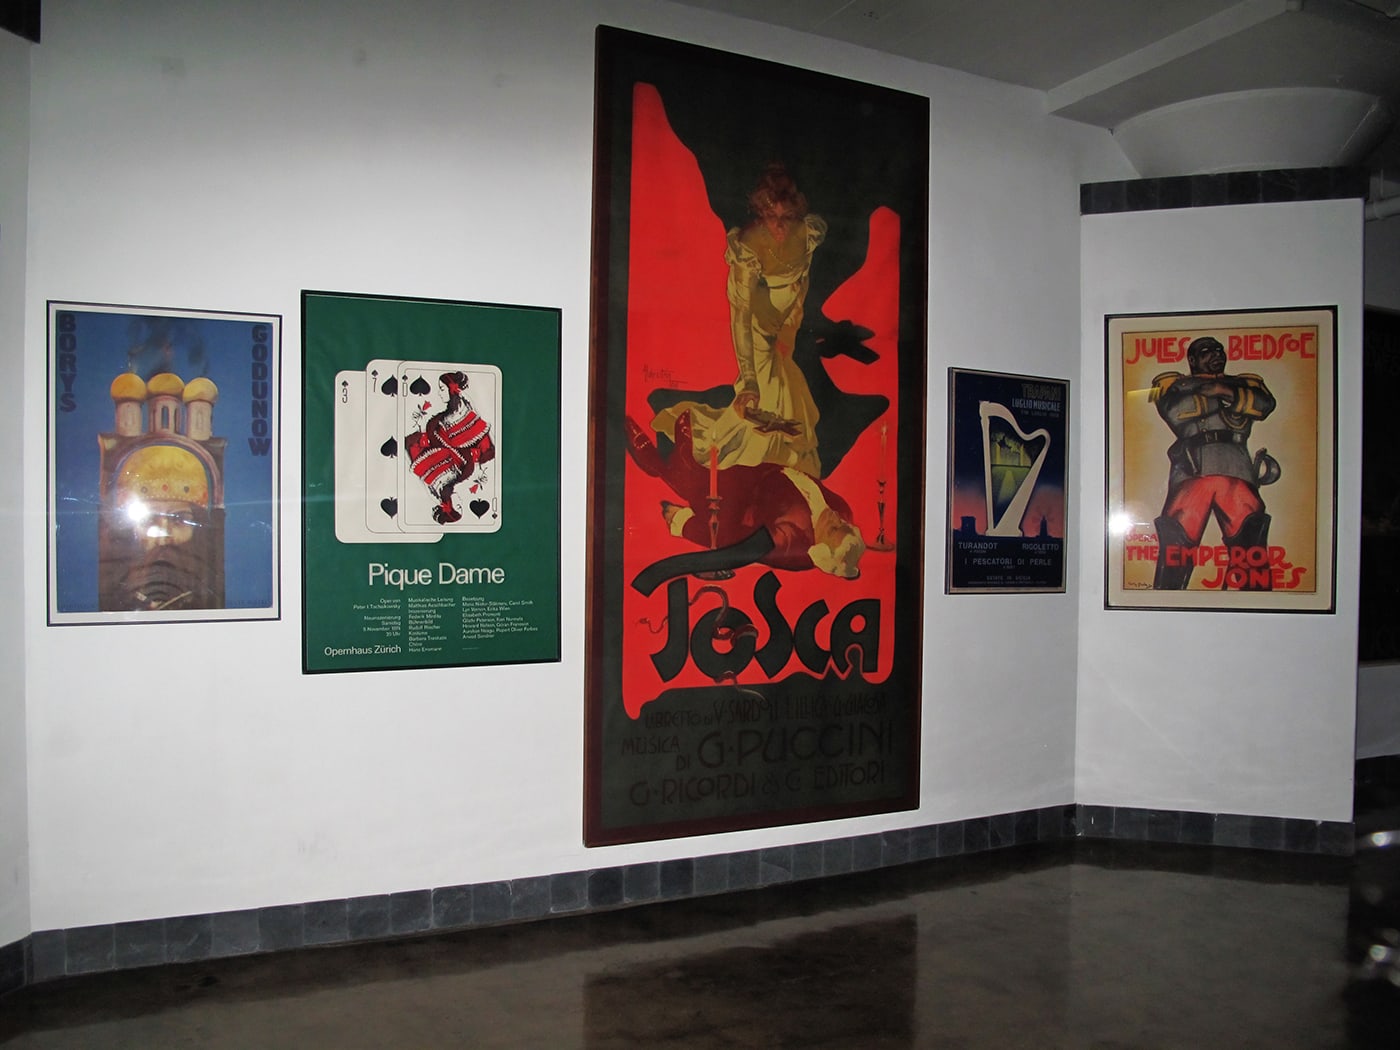 Vintage Opera Posters at The City Museum in St. Louis, Missouri.